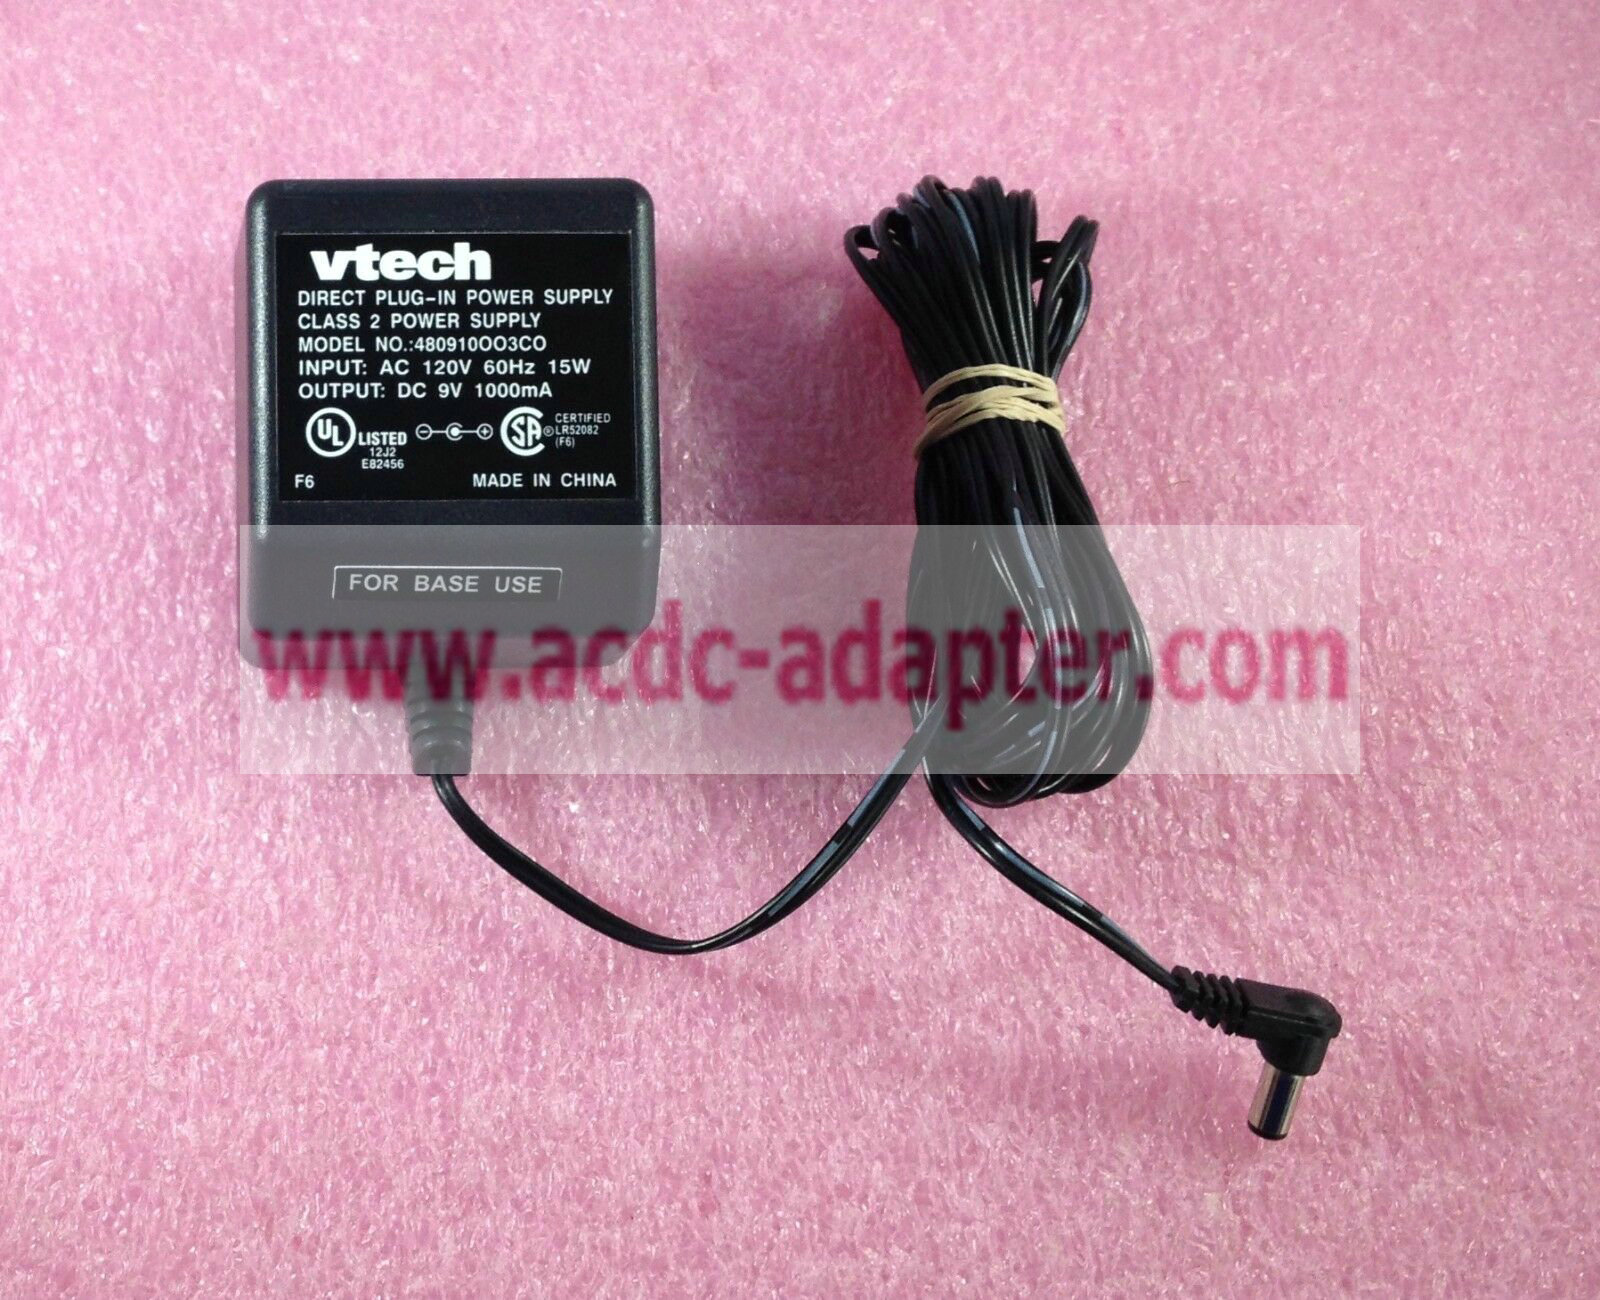 9VDC 1000mA ac adapter for VTECH 480910OO3CO DIRECT PLUG-IN POWER SUPPLY